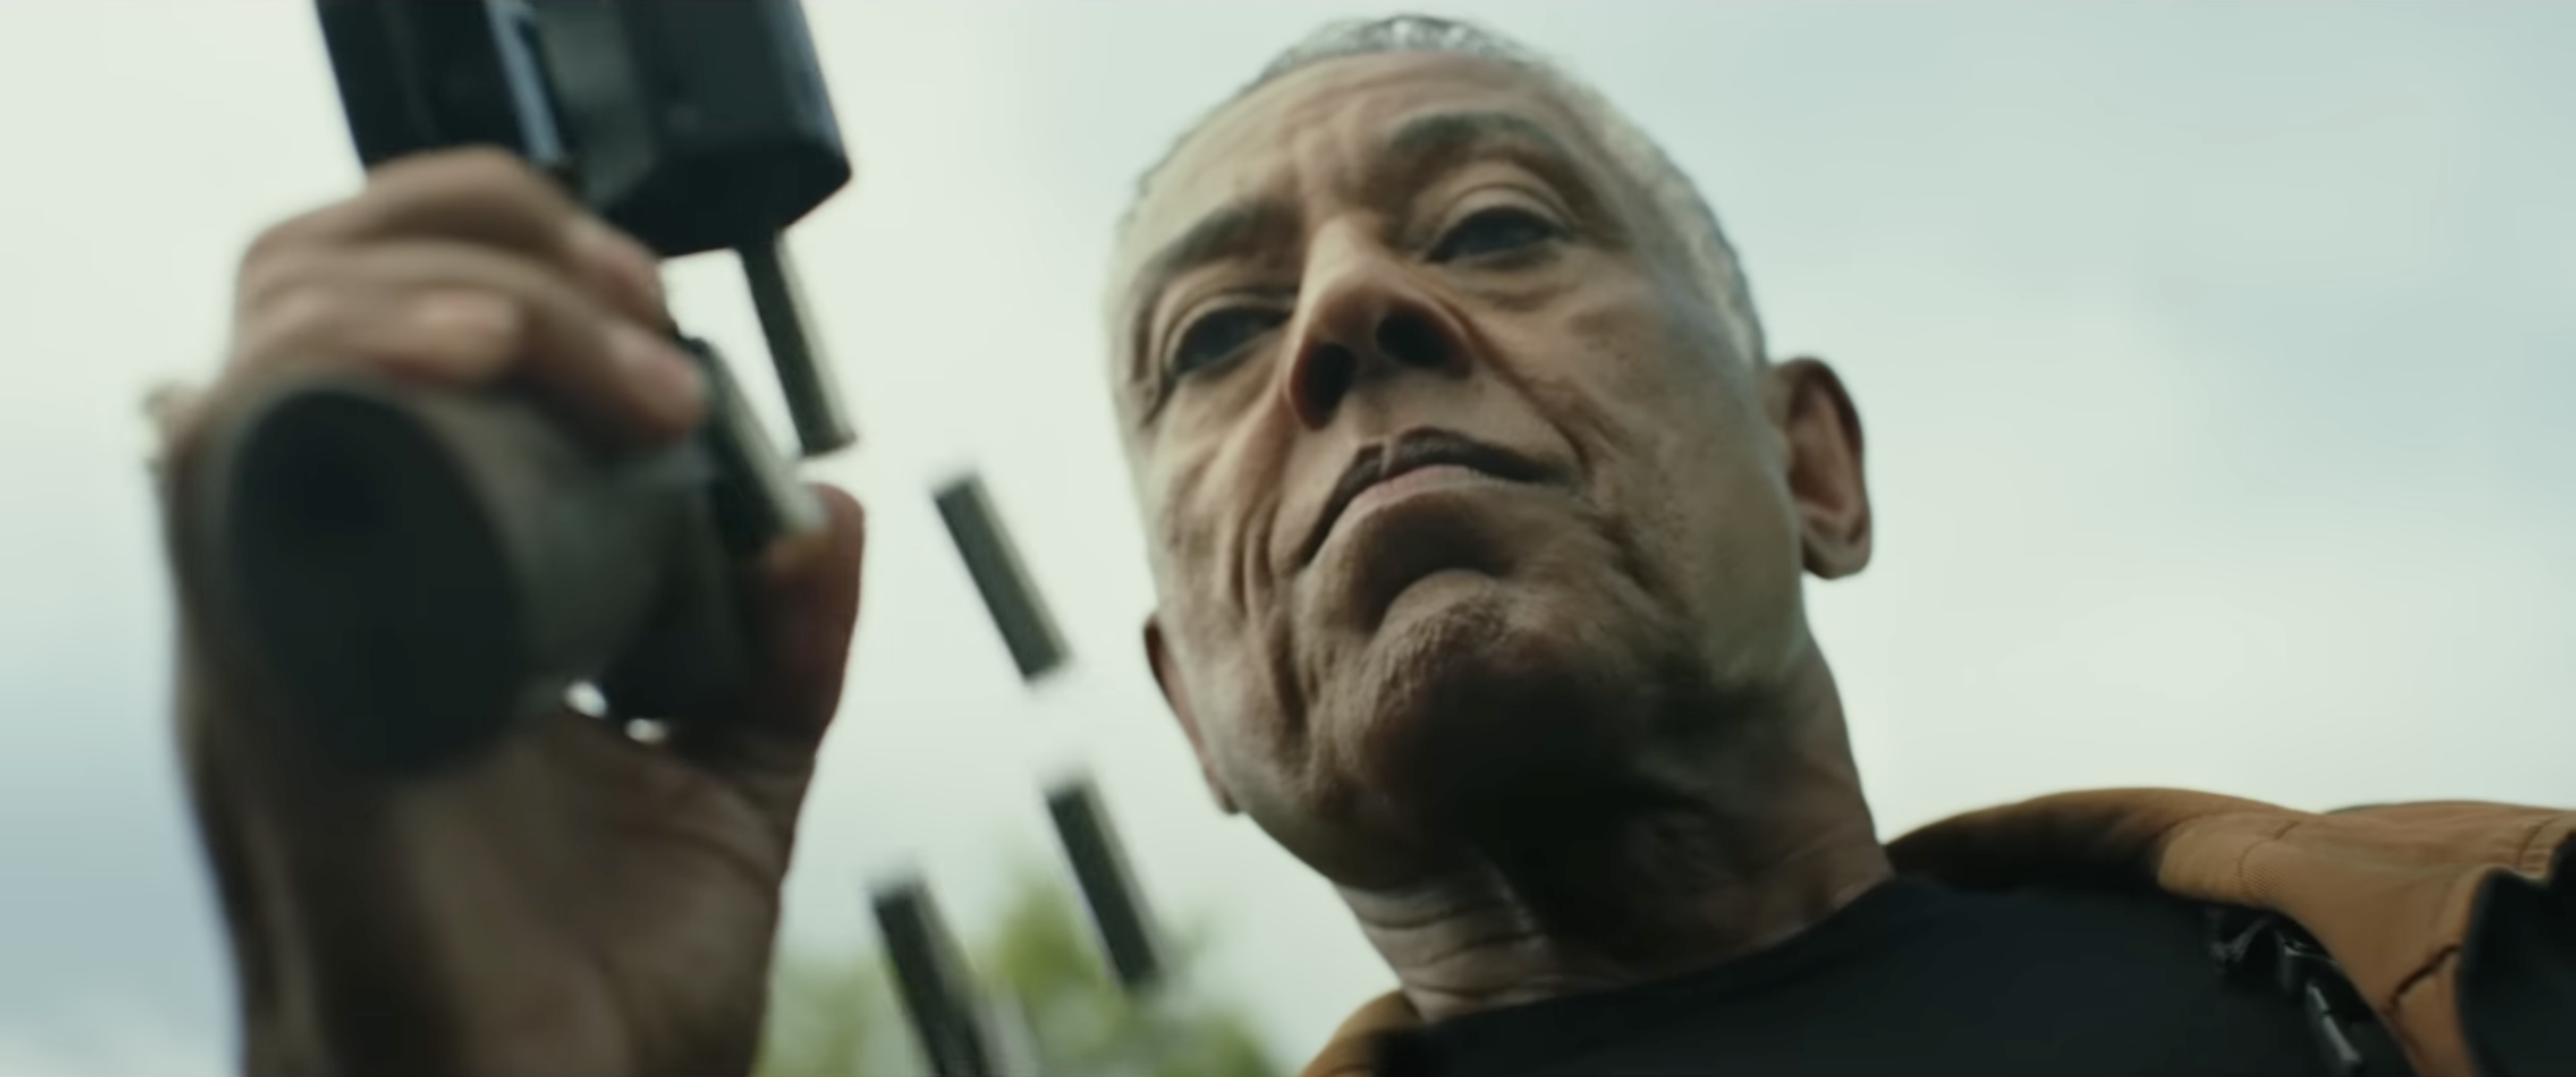 Giancarlo Esposito’s character in Captain America: Brave New World looks down his nose grimly as he ejects a rain of spent shells from his gun.